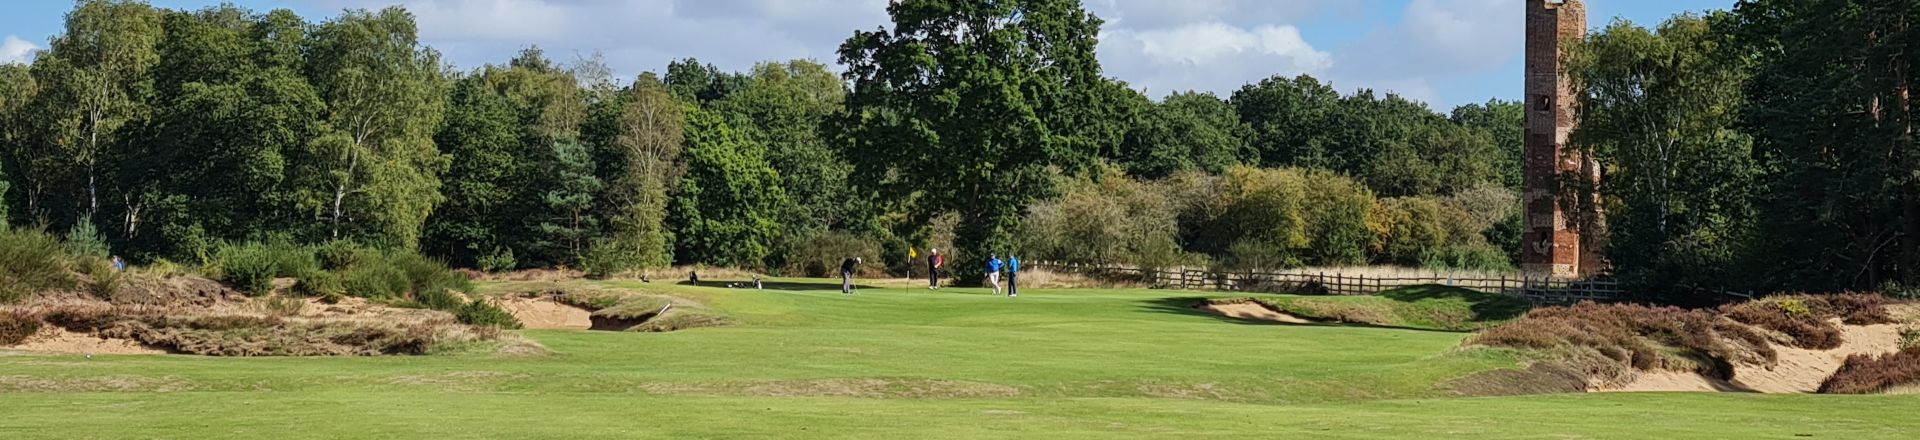 All Golf Tours at Woodhall Spa Hotckin Course